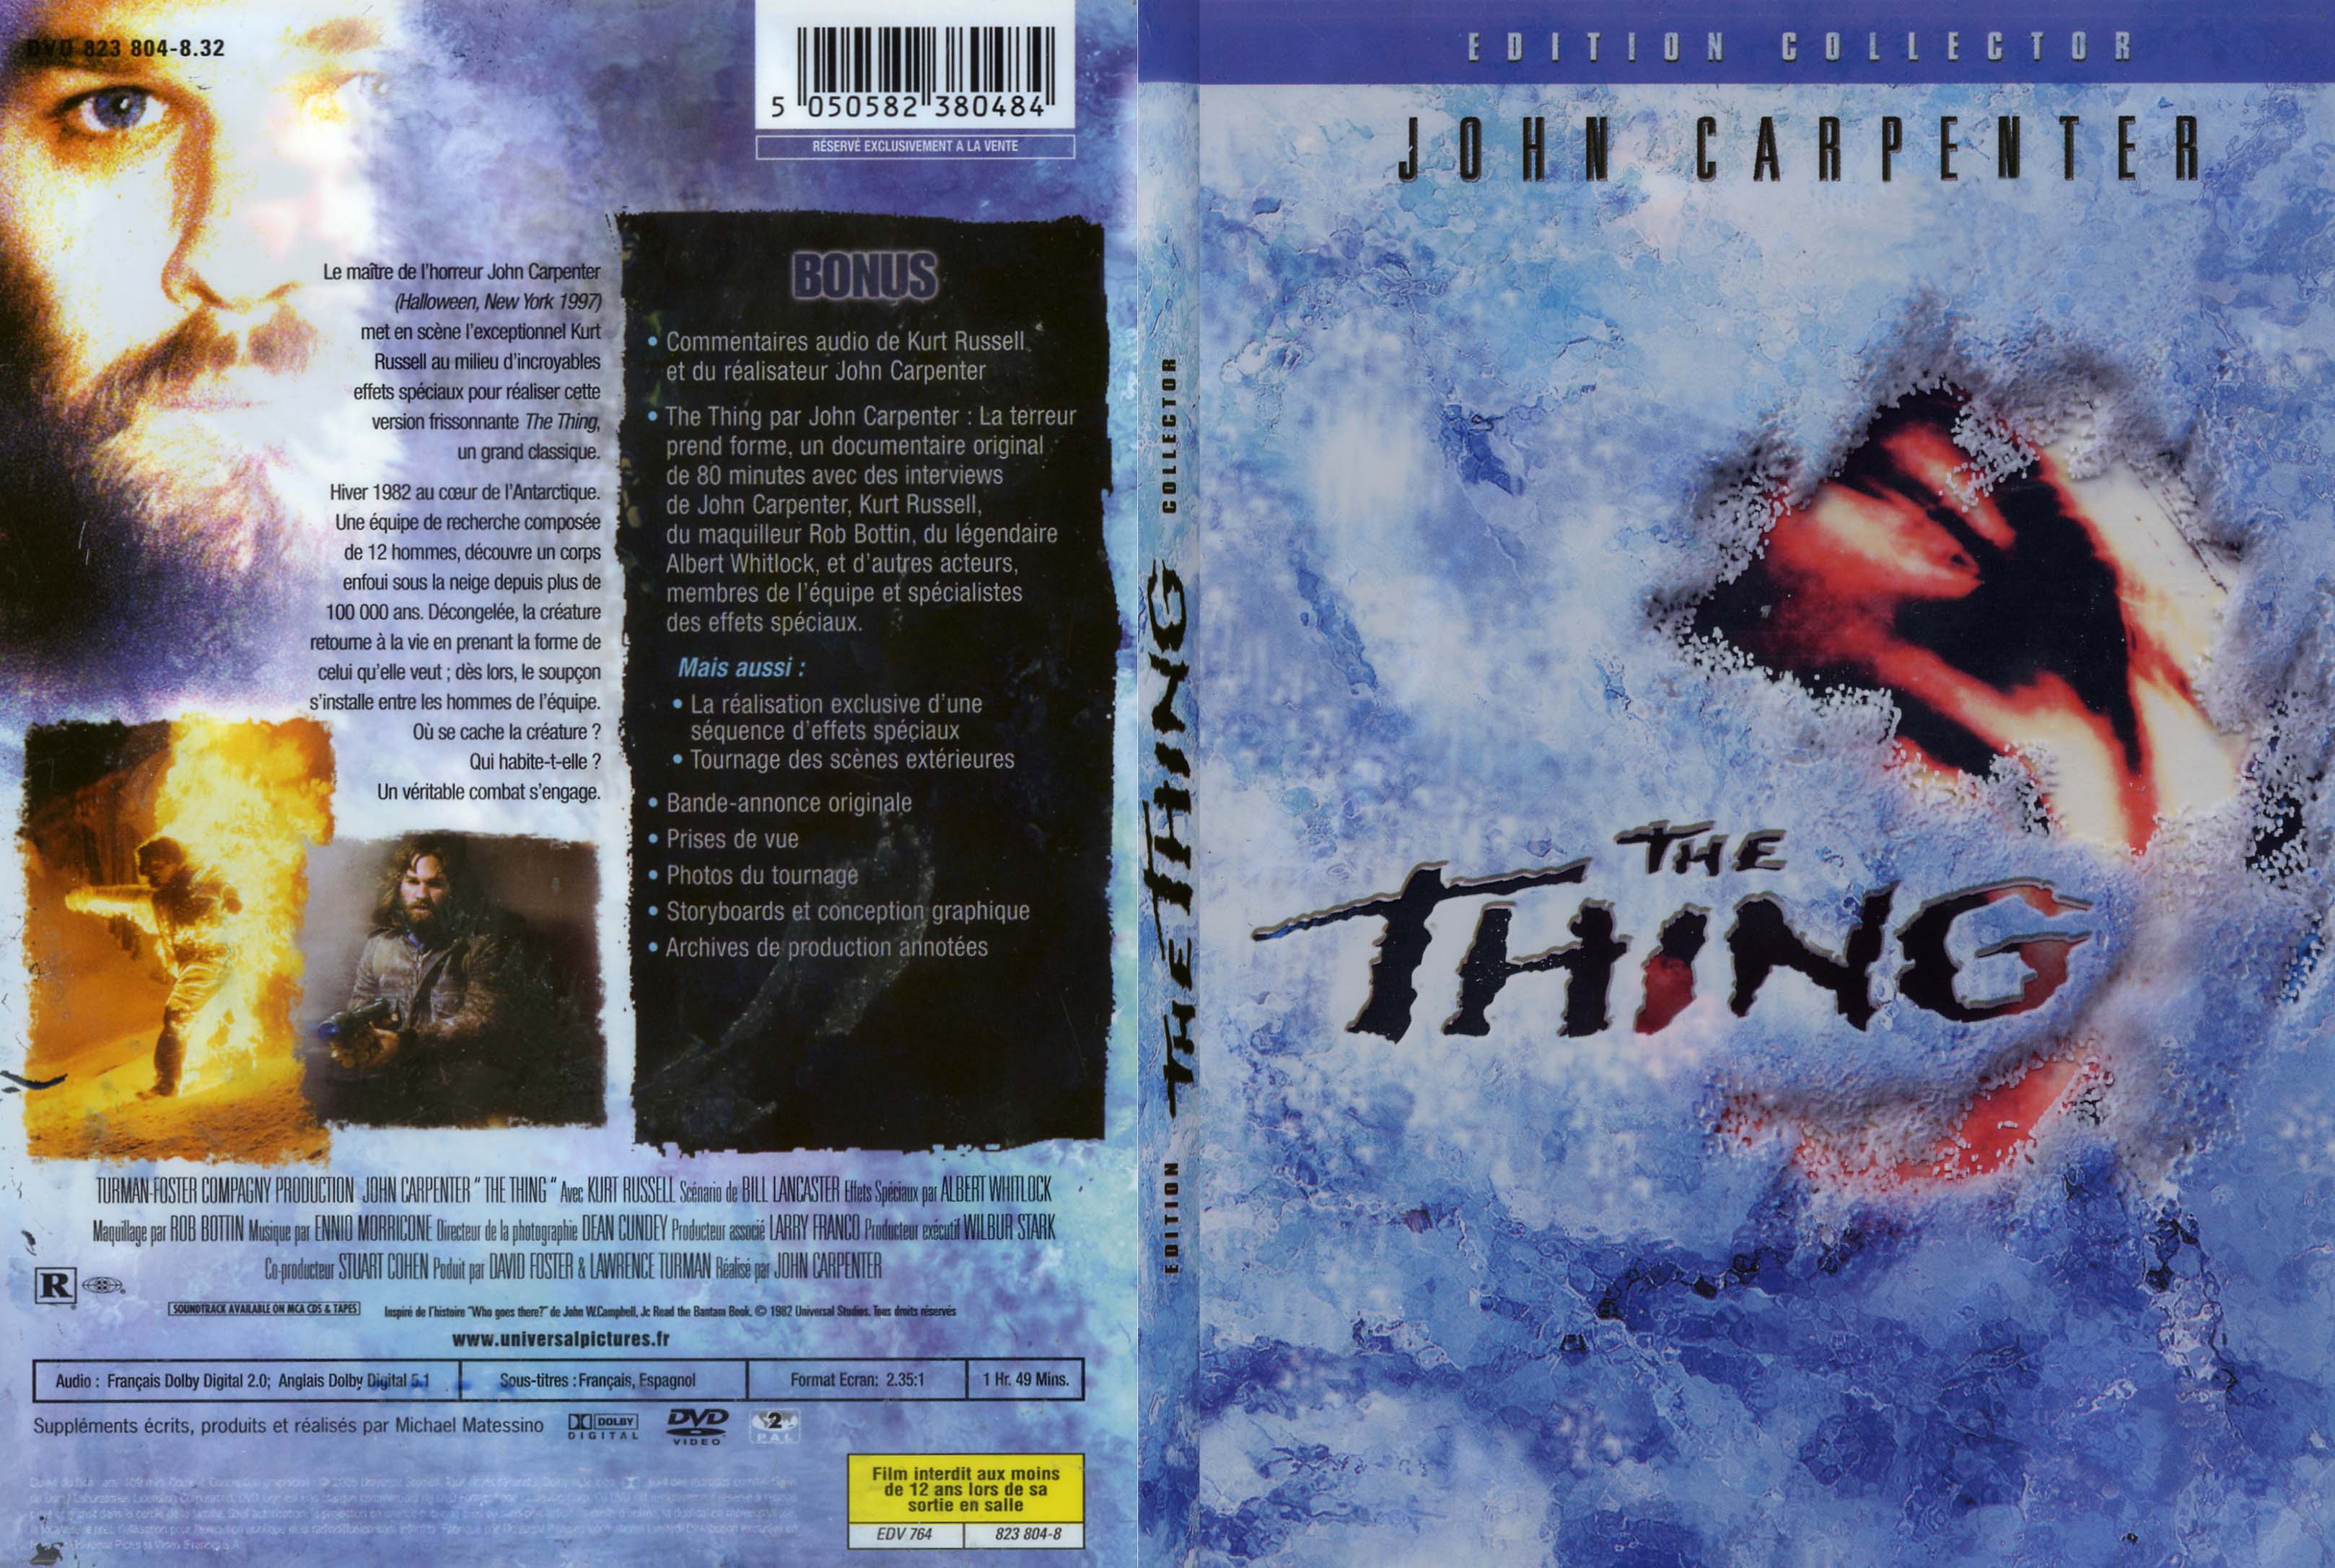 Jaquette DVD The thing - SLIM